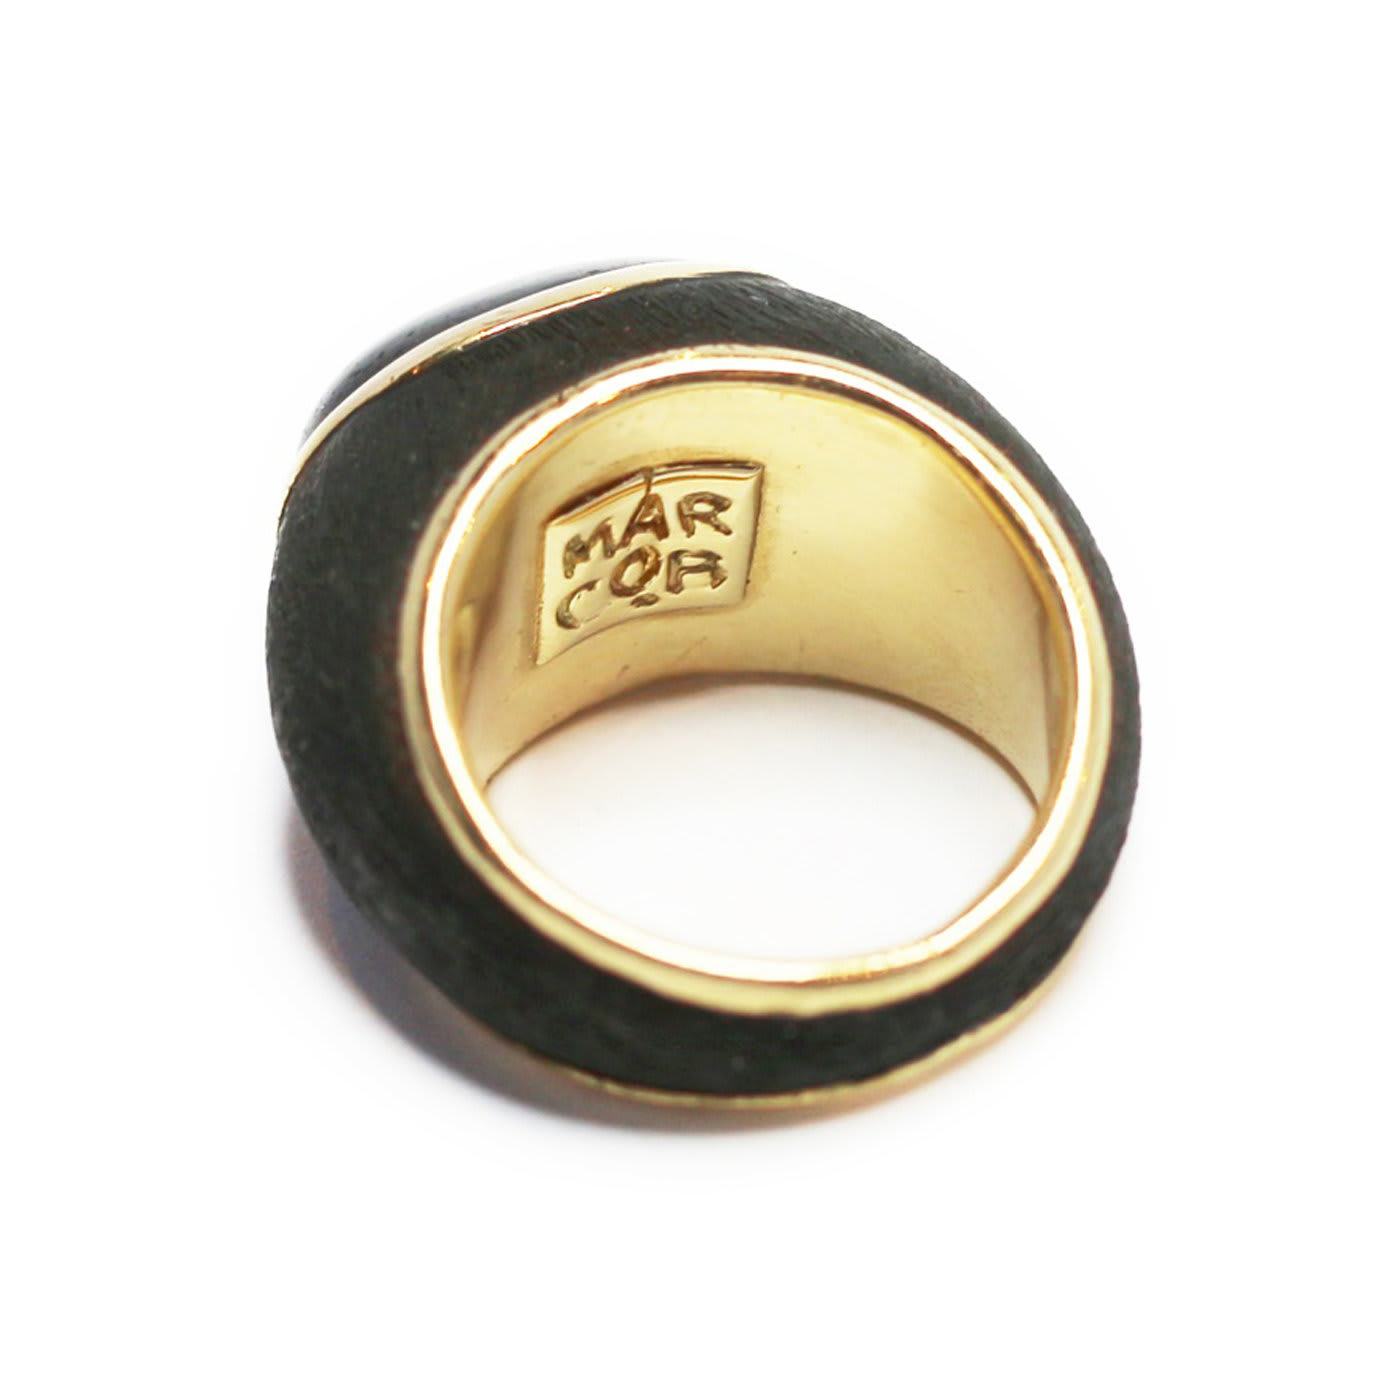 Iron Ring with Gold and Onyx - Marco Baroni